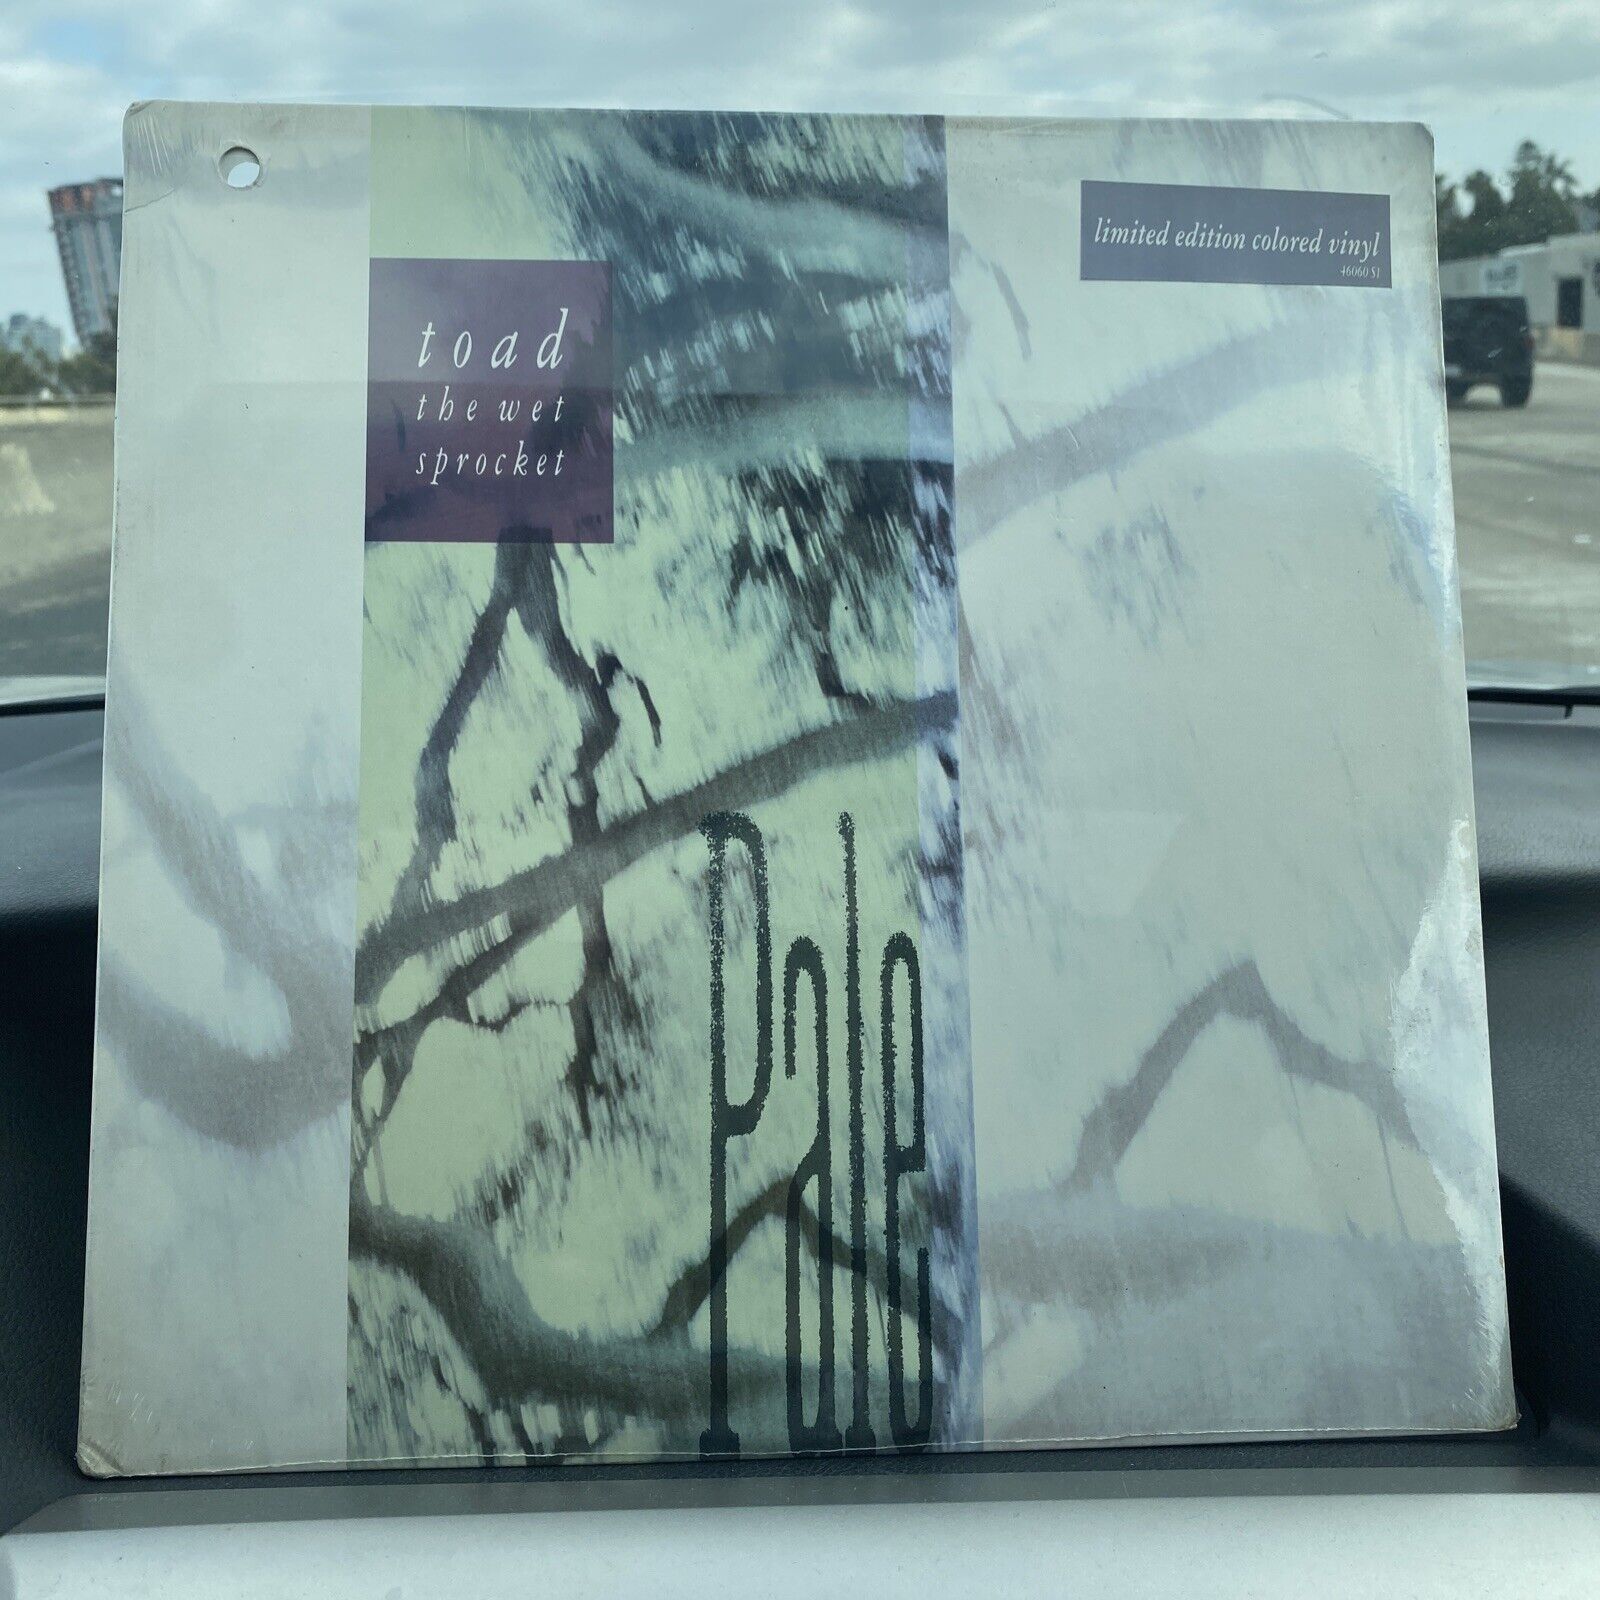 SEALED Toad the Wet Sprocket - Pale LP 1990 Pressing HYPE STICKER Colored Vinyl